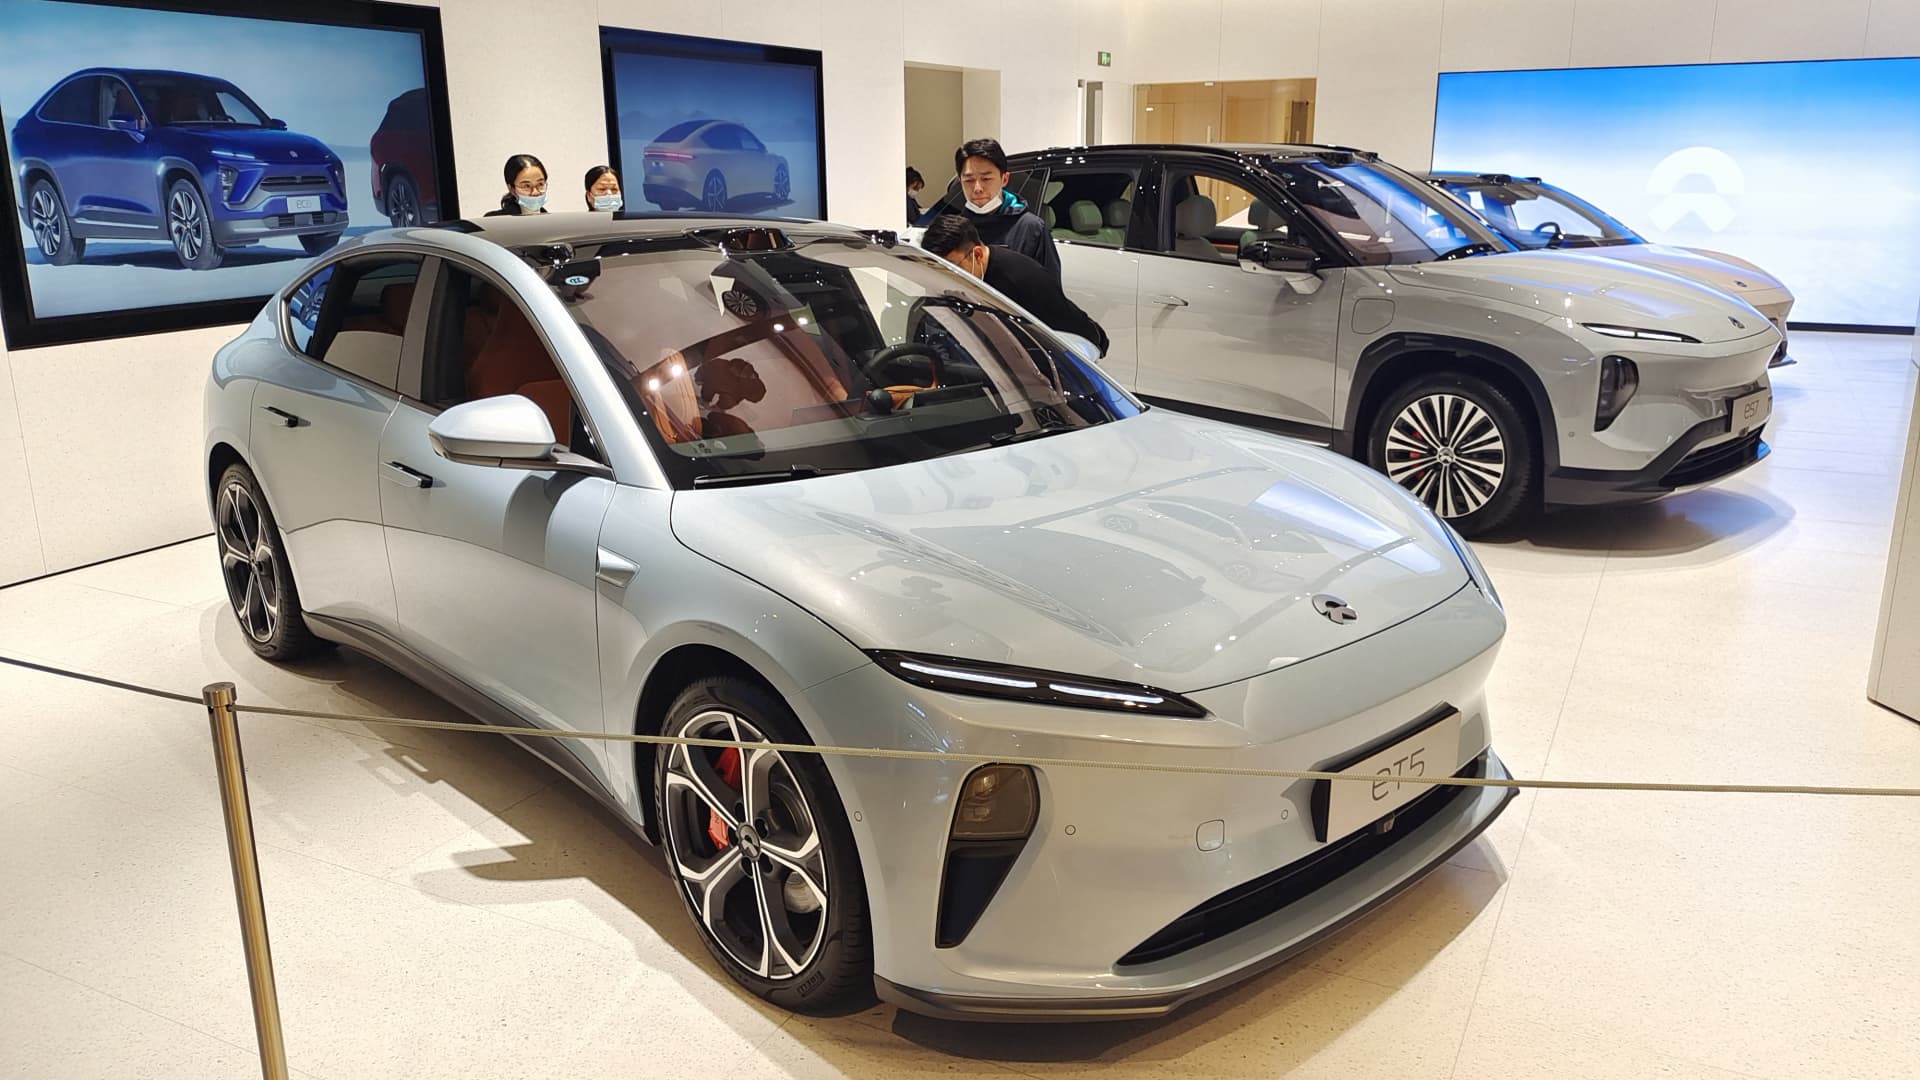 Nio says it won’t join the ‘price war’ and slash prices like Tesla